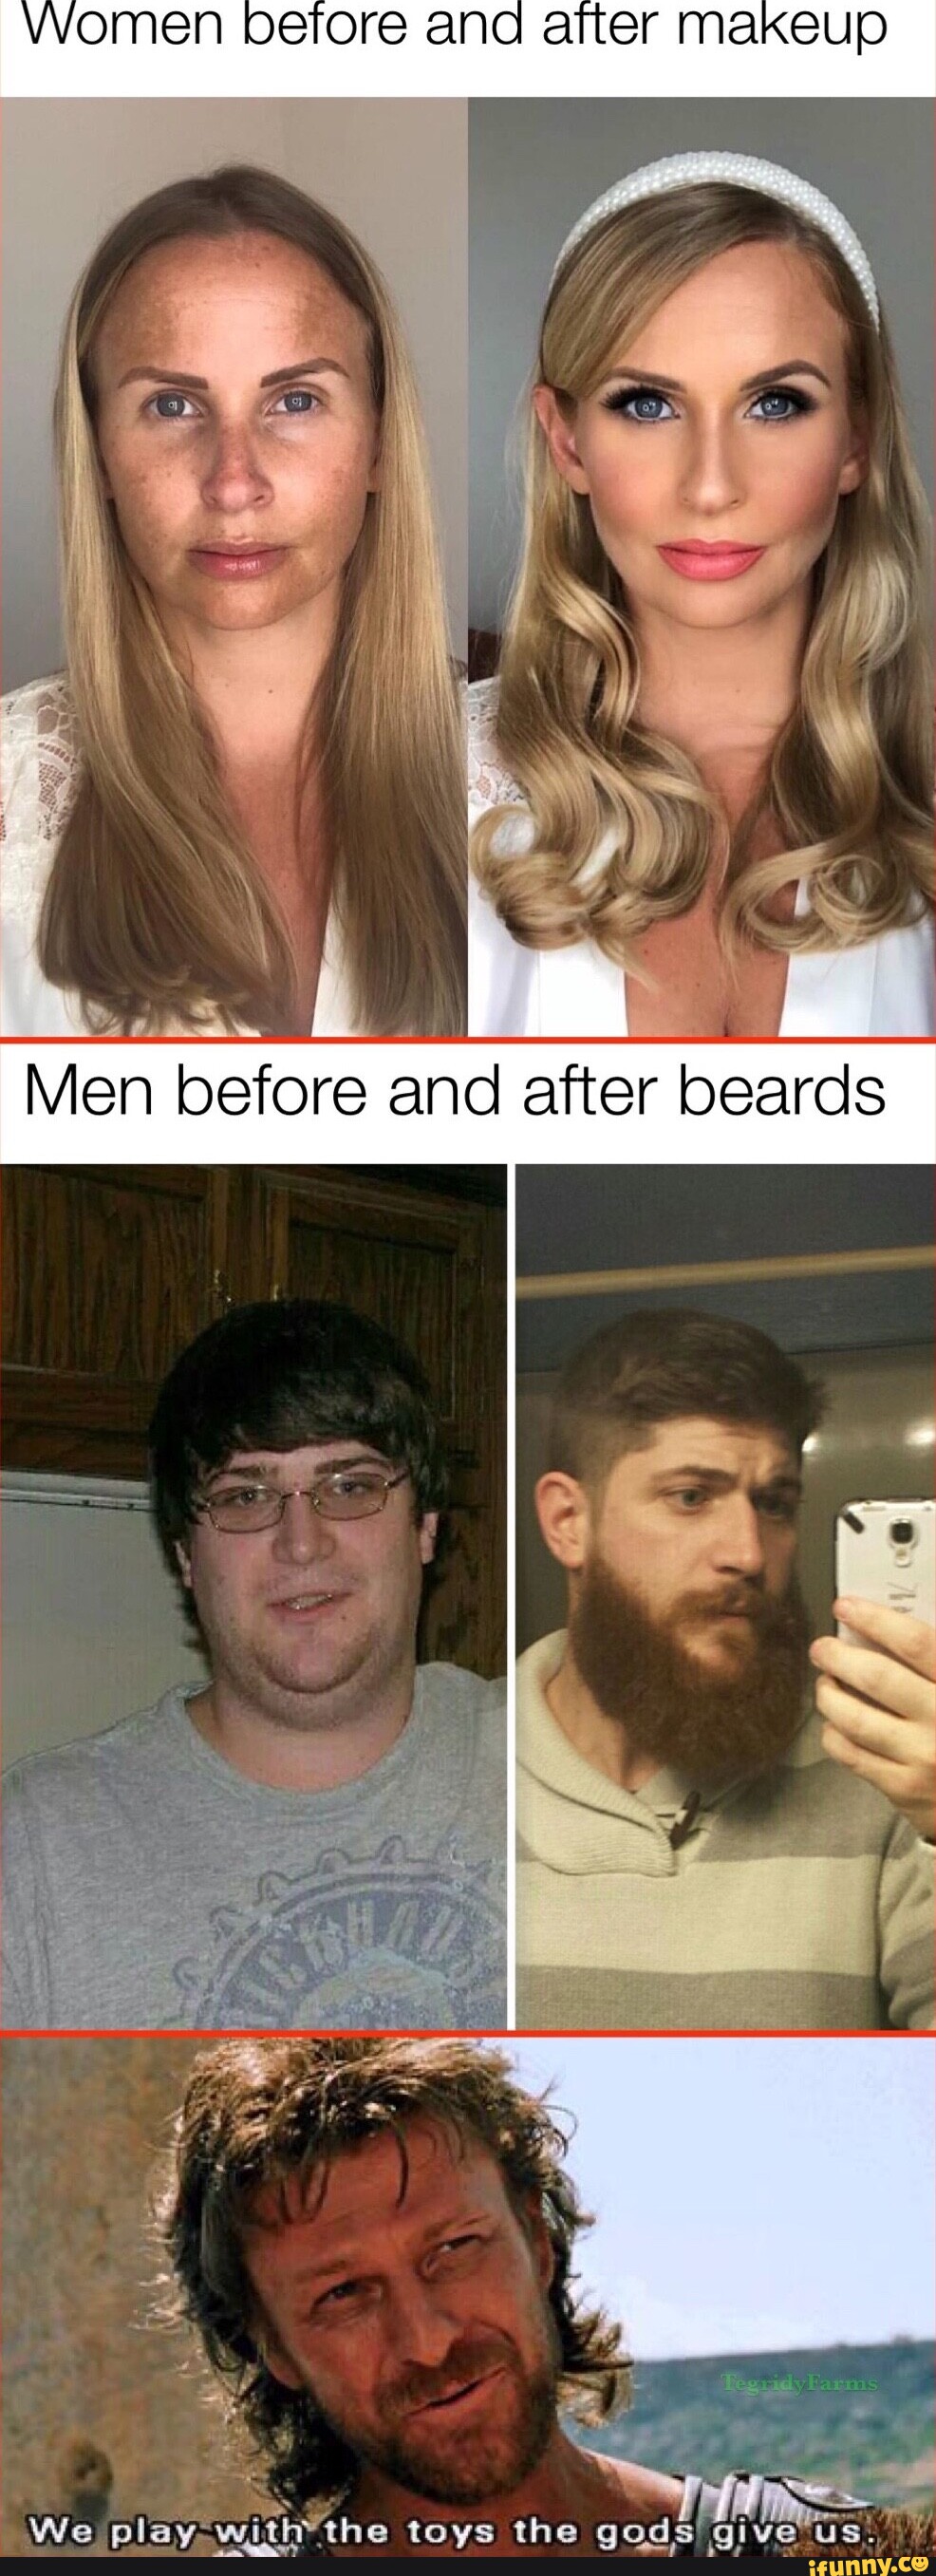 Before And Alter Makeup Men